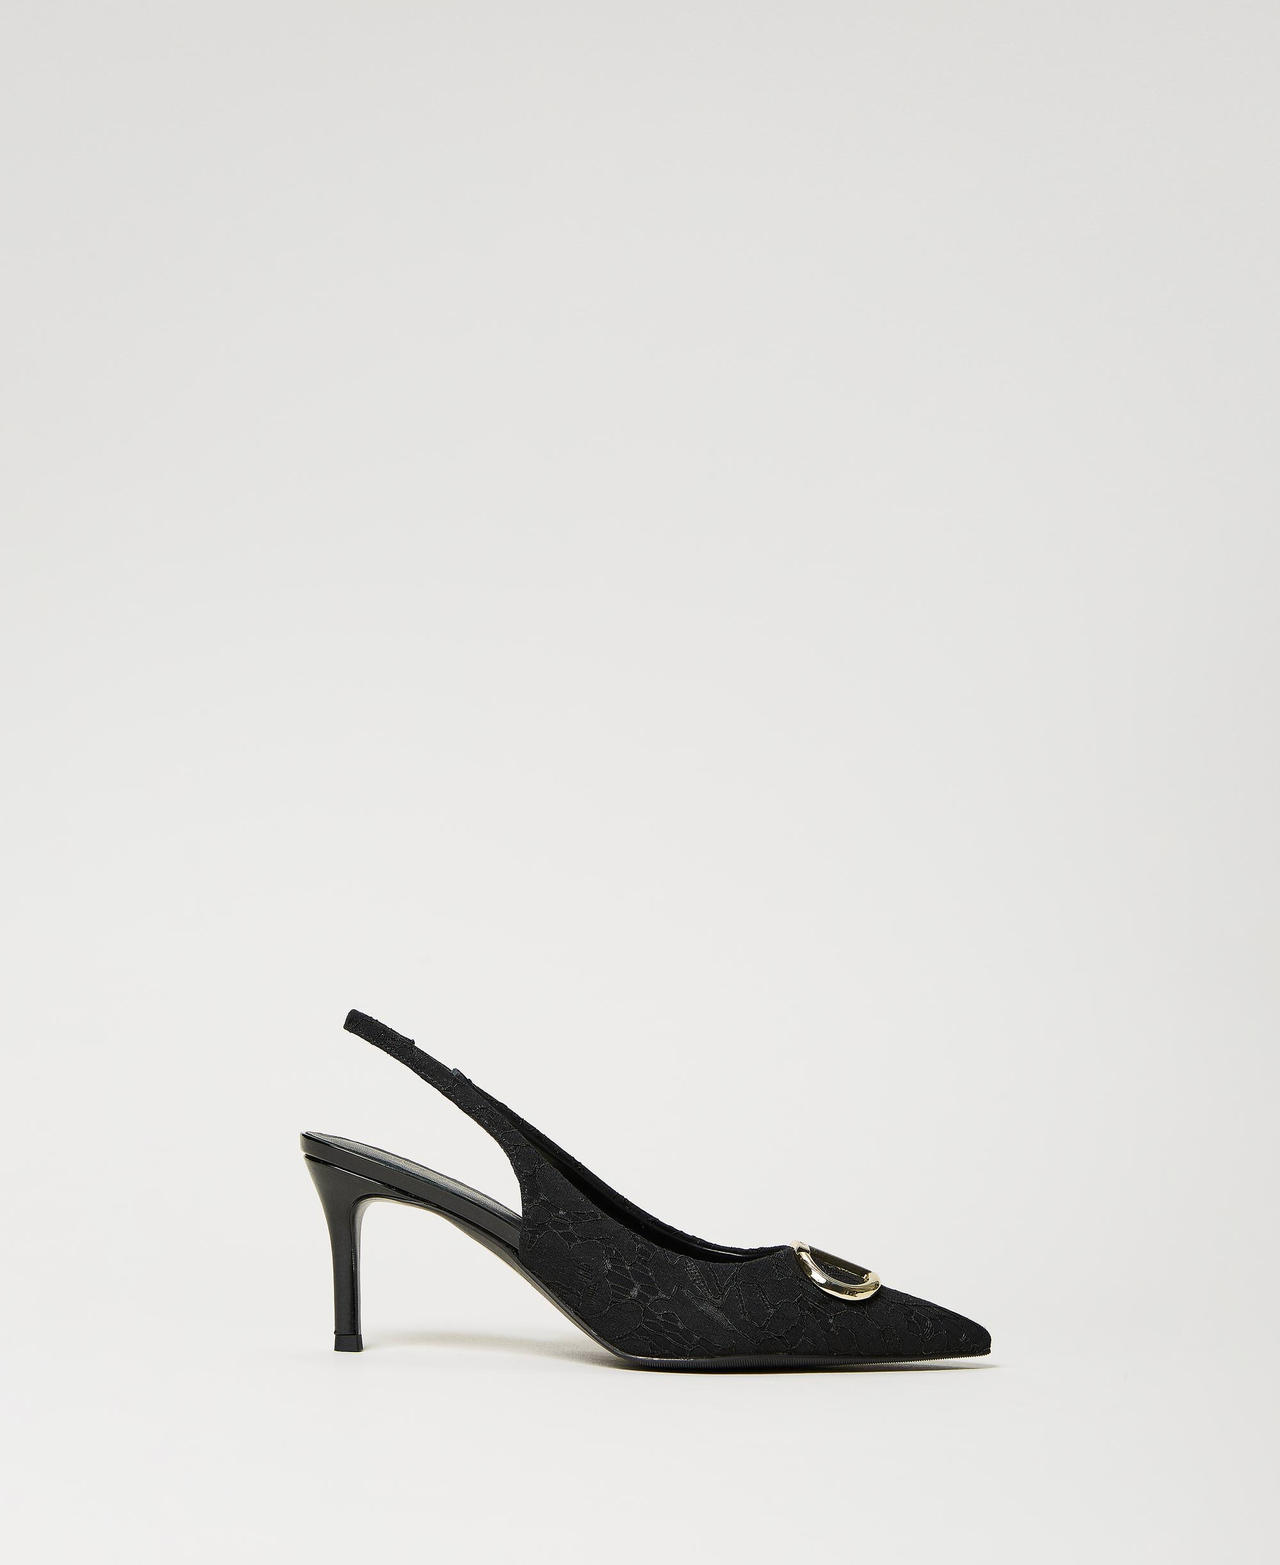 Twinset Scarpe - Décolleté sling back in pizzo, Nero, Taglia: 41 product